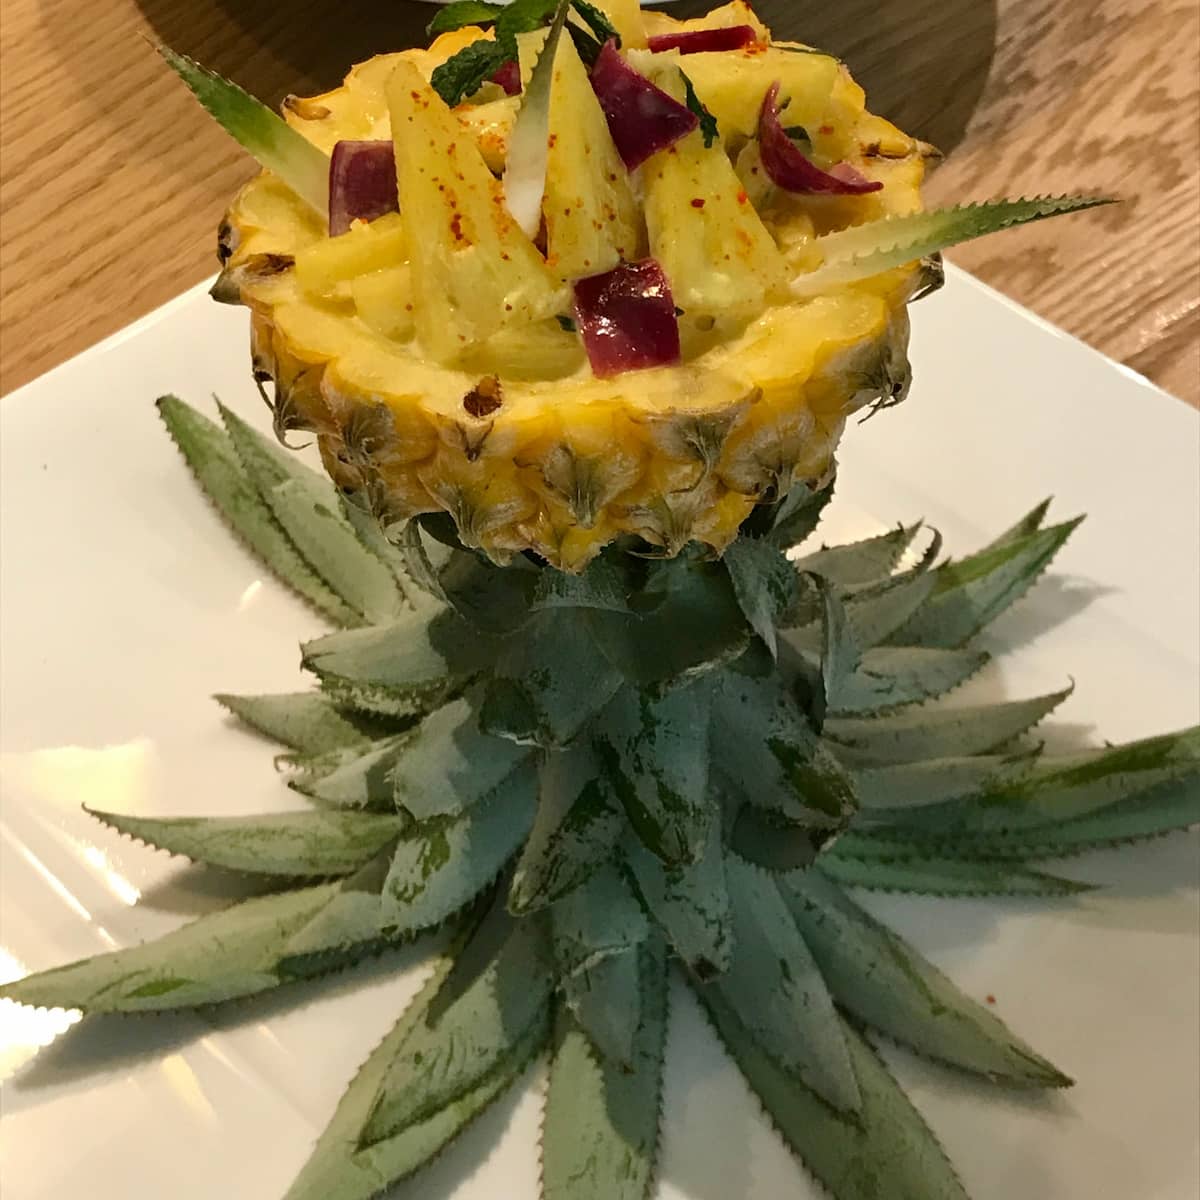 upside down pineapple serving idea with cut pineapple inside